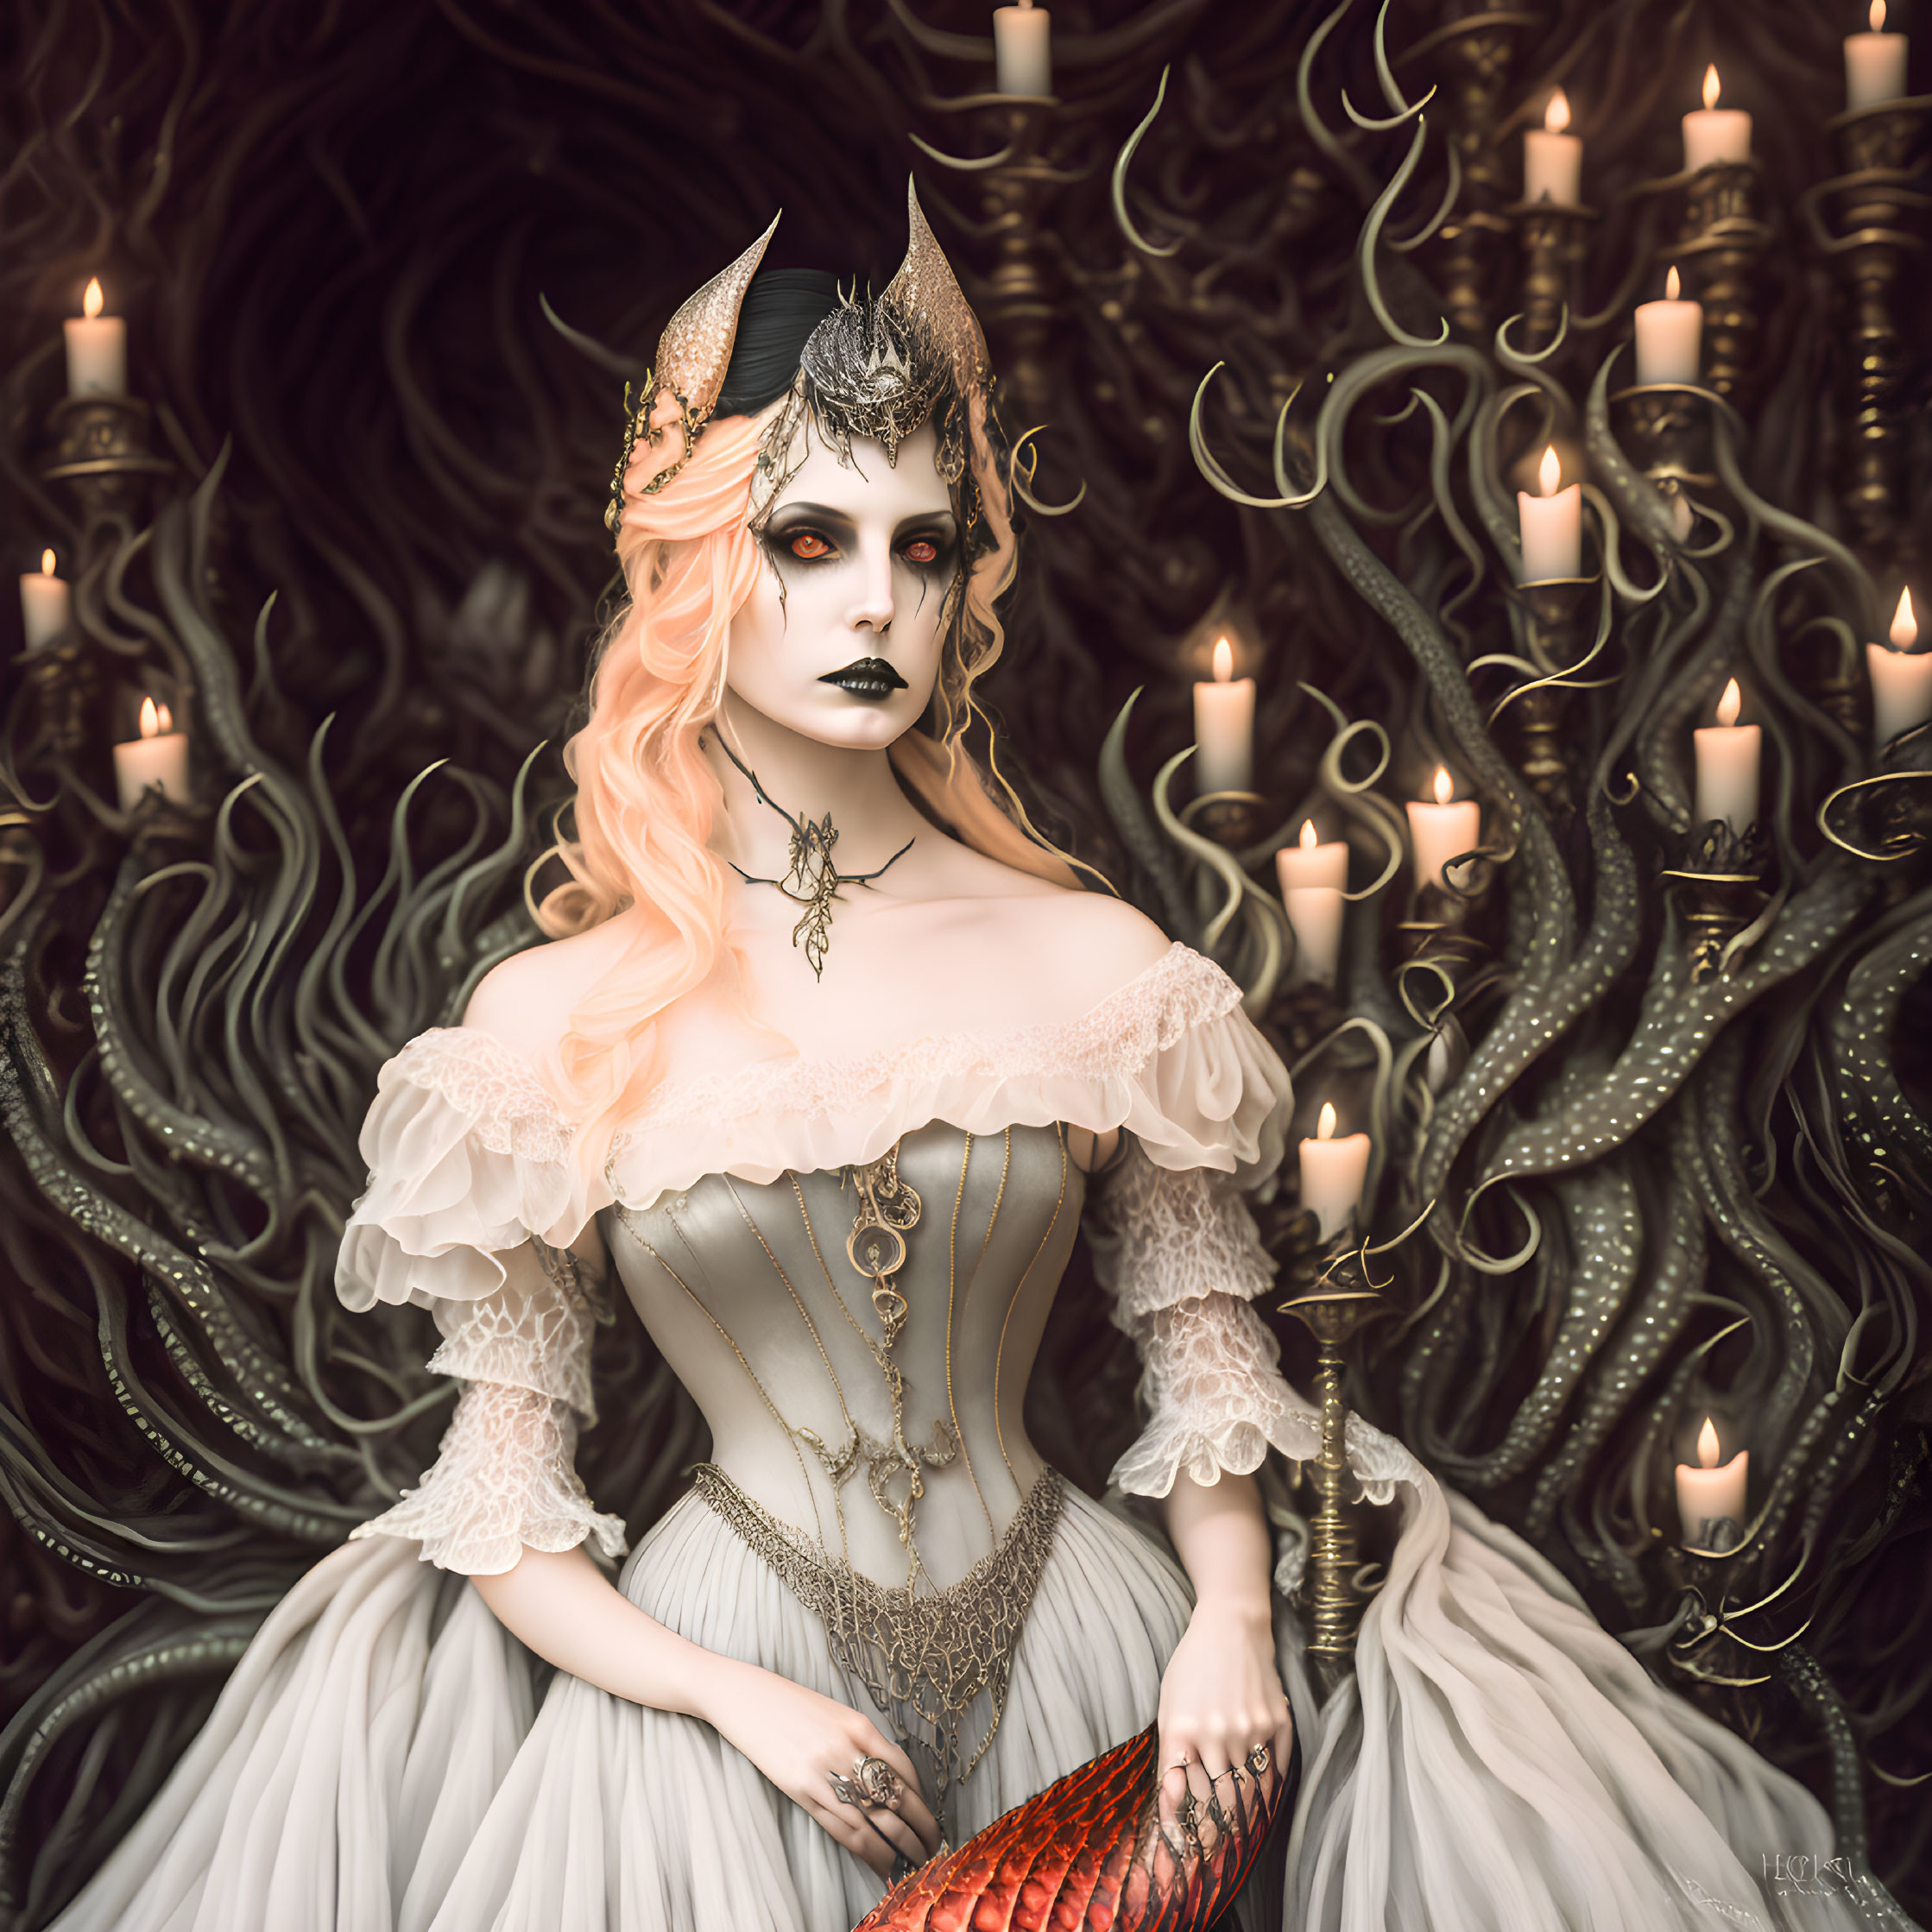 Dark Fantasy Art: Female Character with Horns, Eerie Crown, Tentacles, Candles,